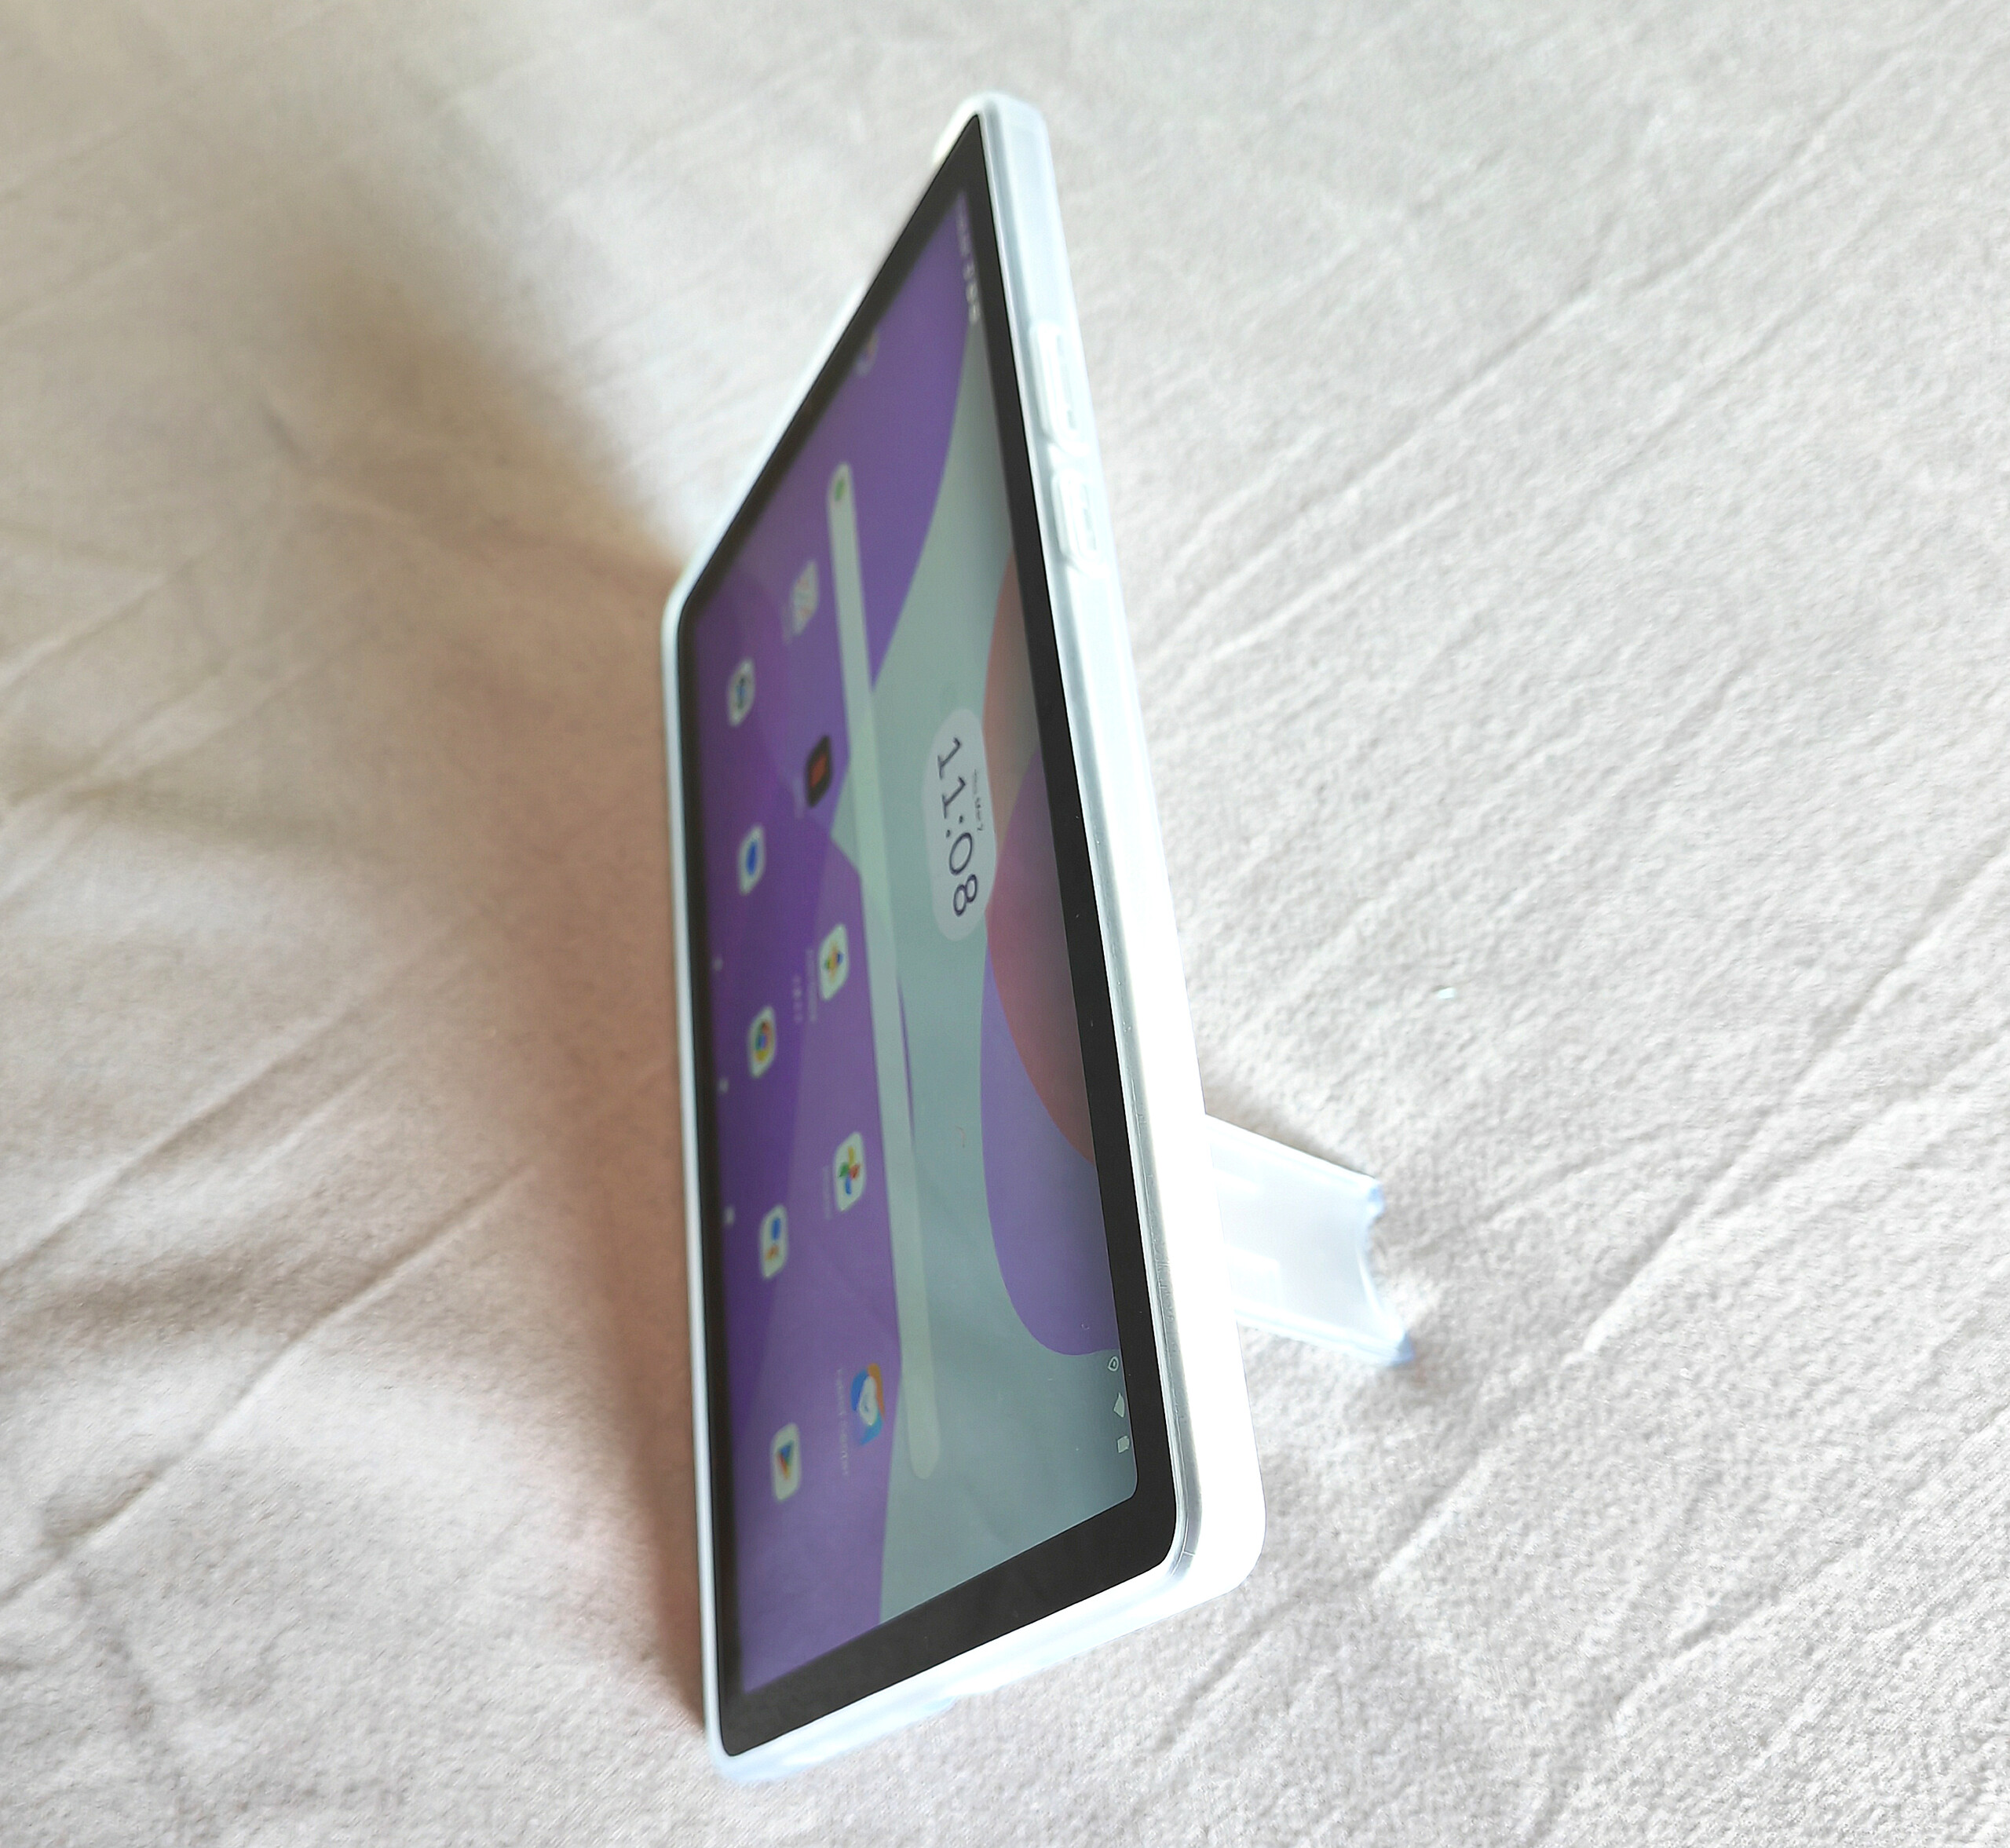 Lenovo Tab M9 Unboxing and Tour - Features, Specs, and More! 